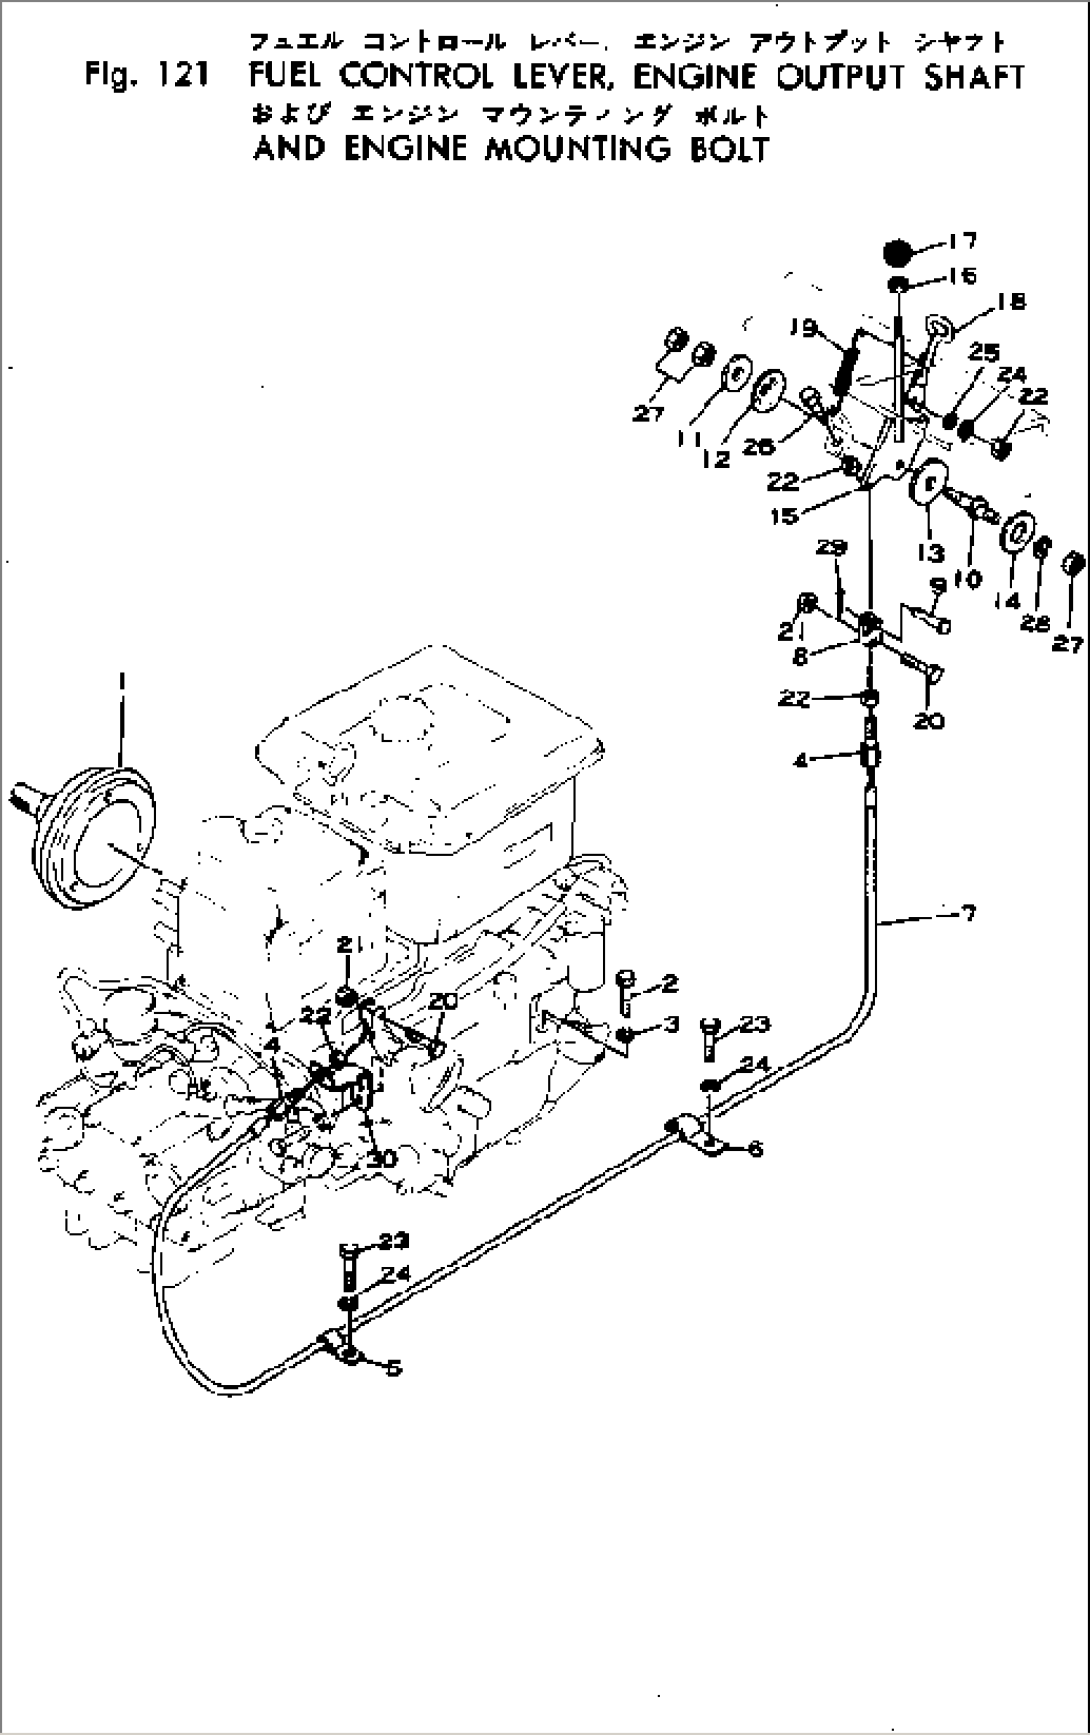 FUEL CONTROL LEVER¤ ENGINE OUTPUT SHAFT AND ENGINE MOUNTING